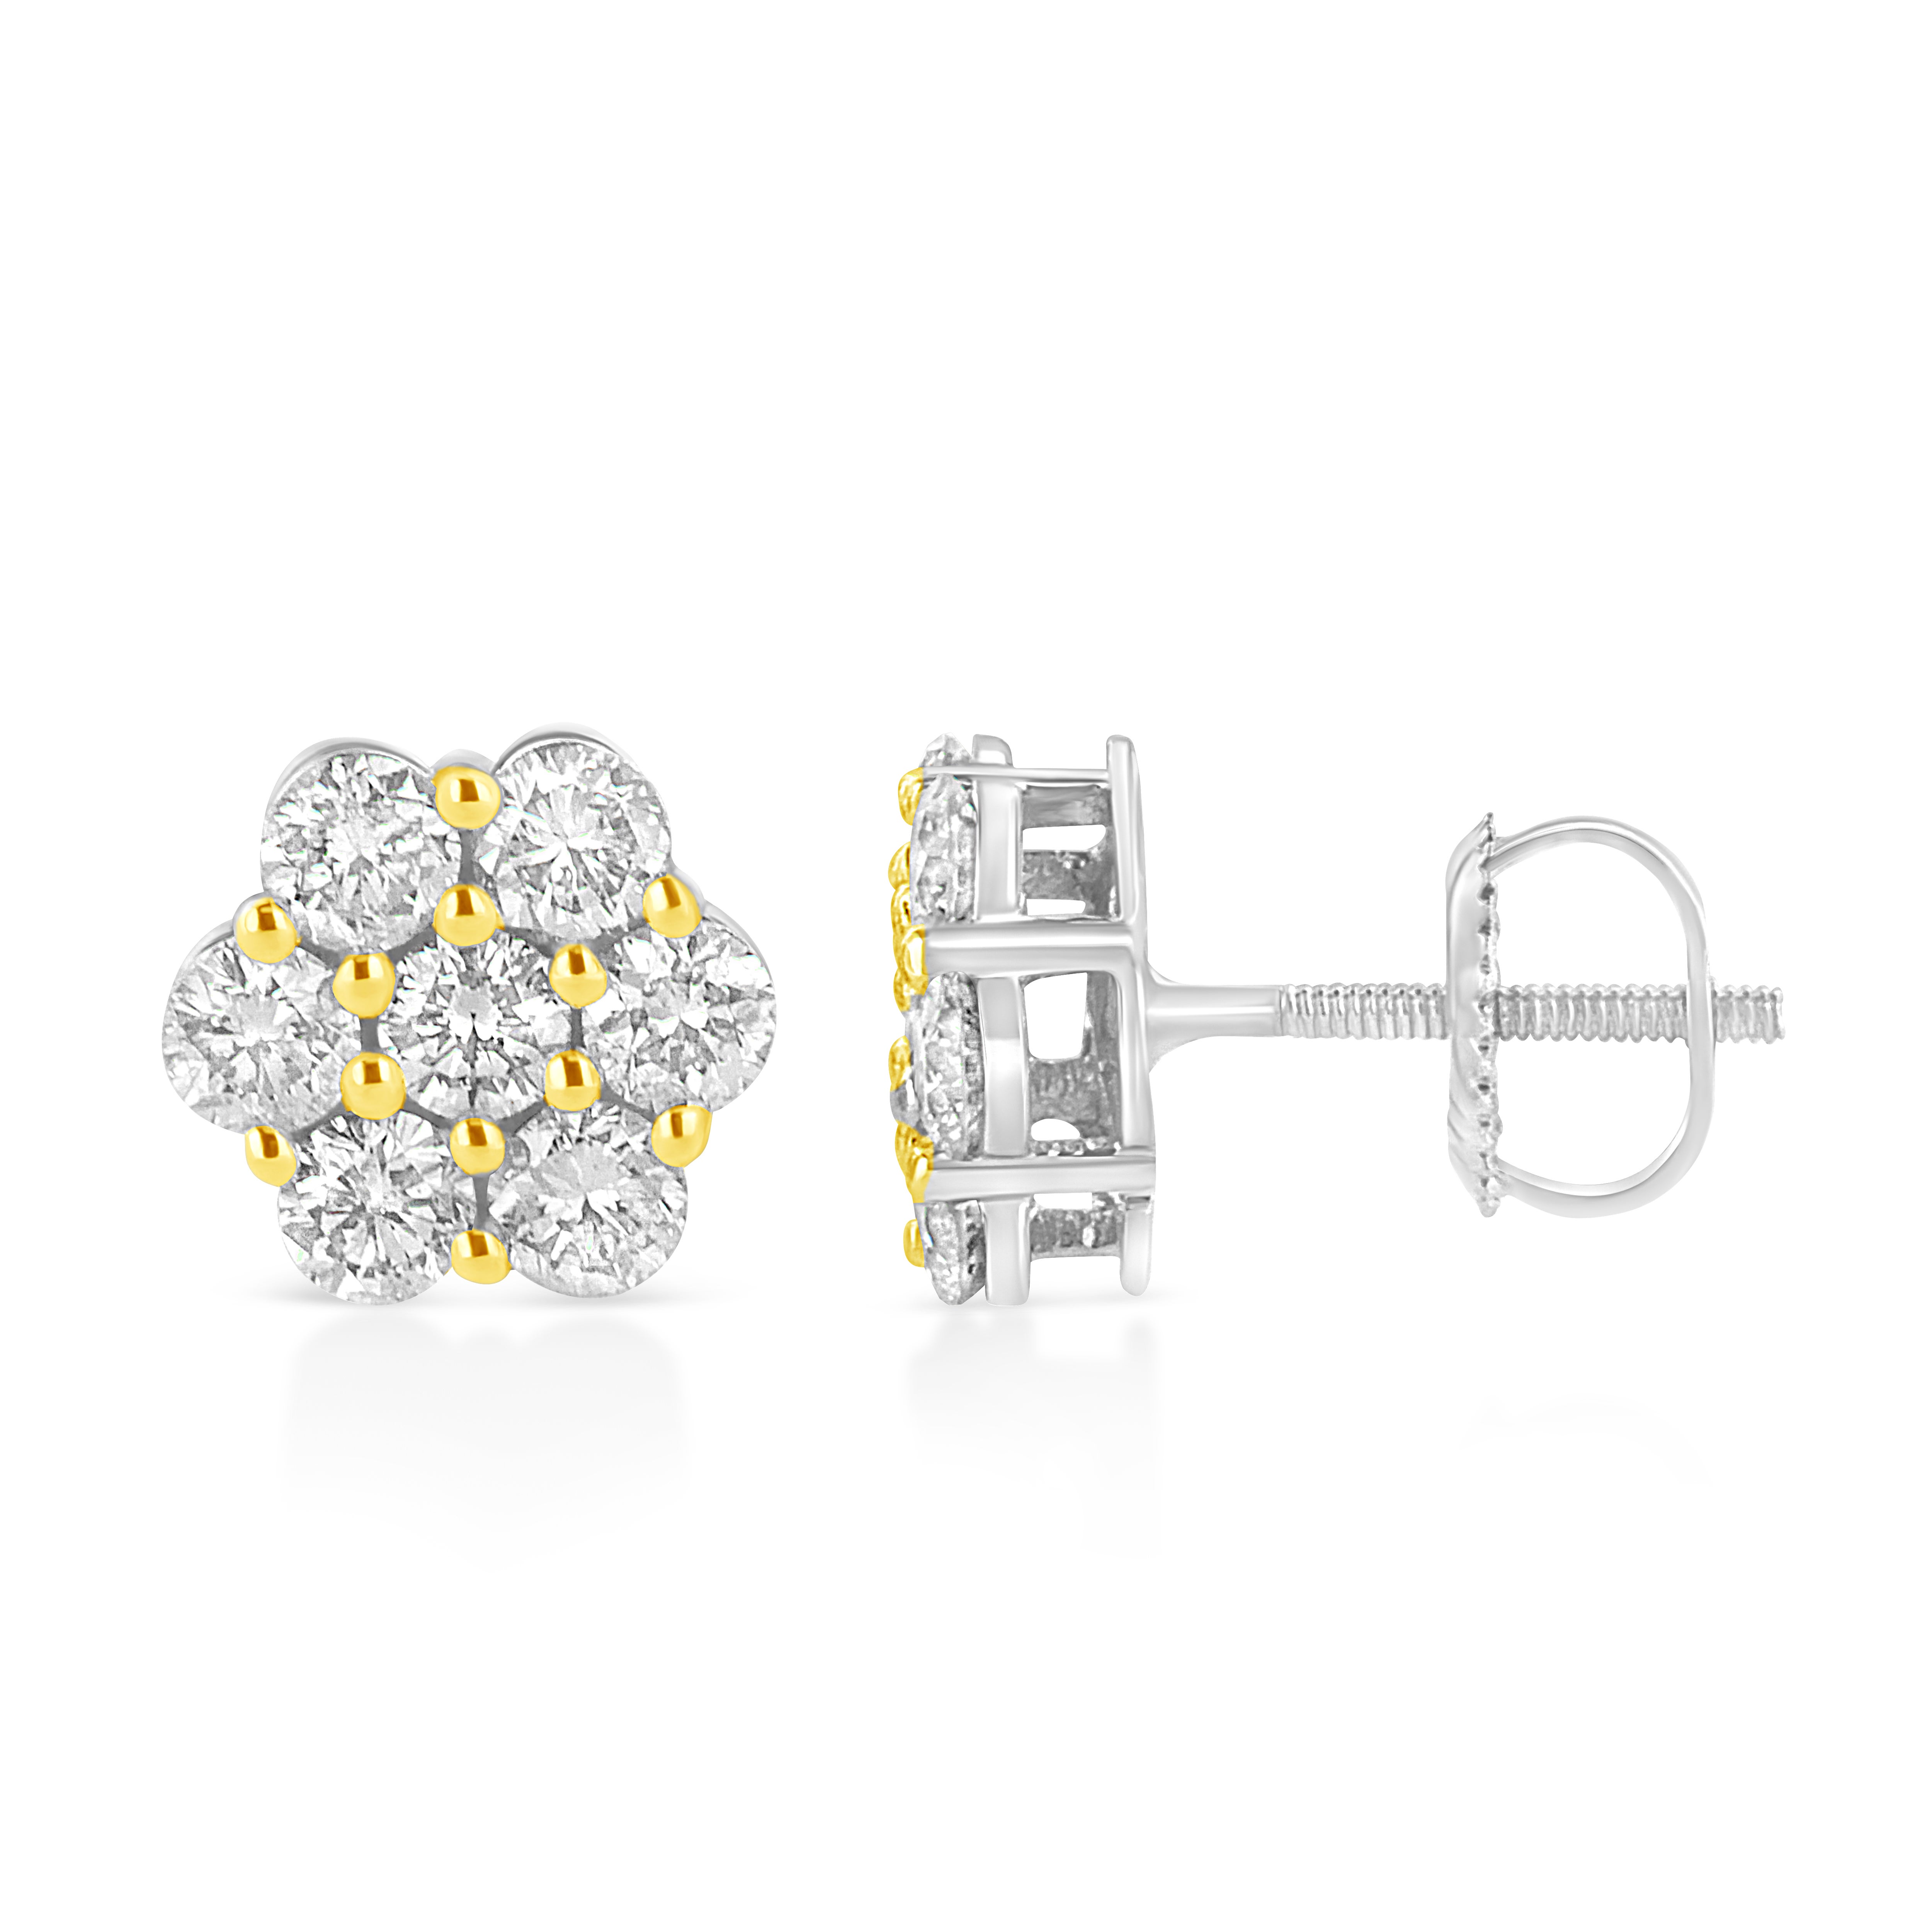 Yellow Gold Over Silver 1/4 Ct Diamond Cluster Stud Earrings